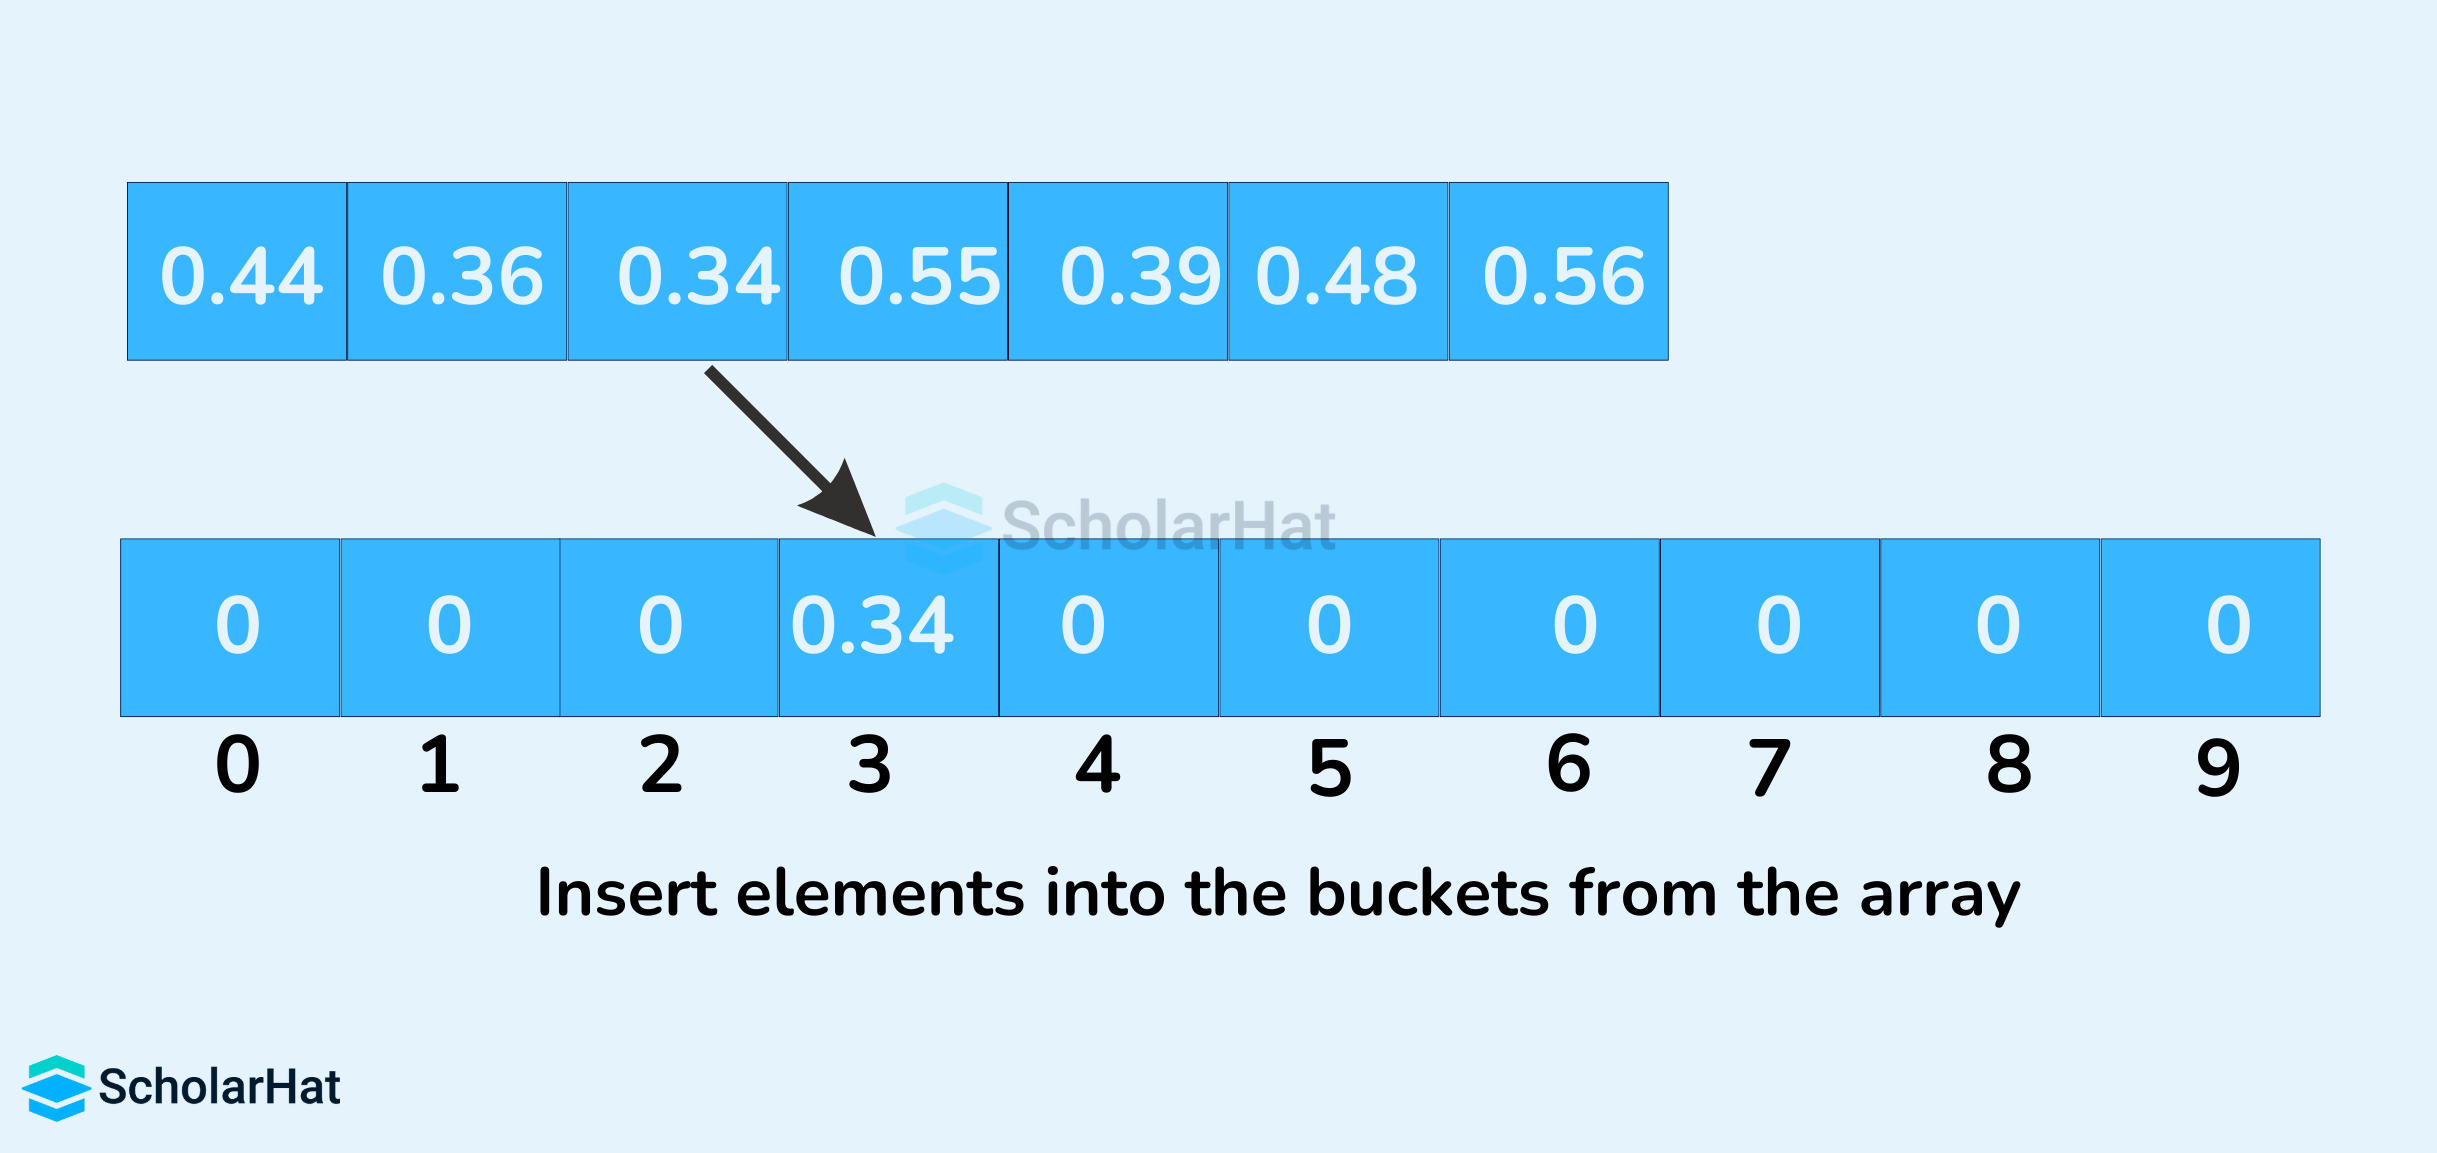 Insert elements into the buckets from the array